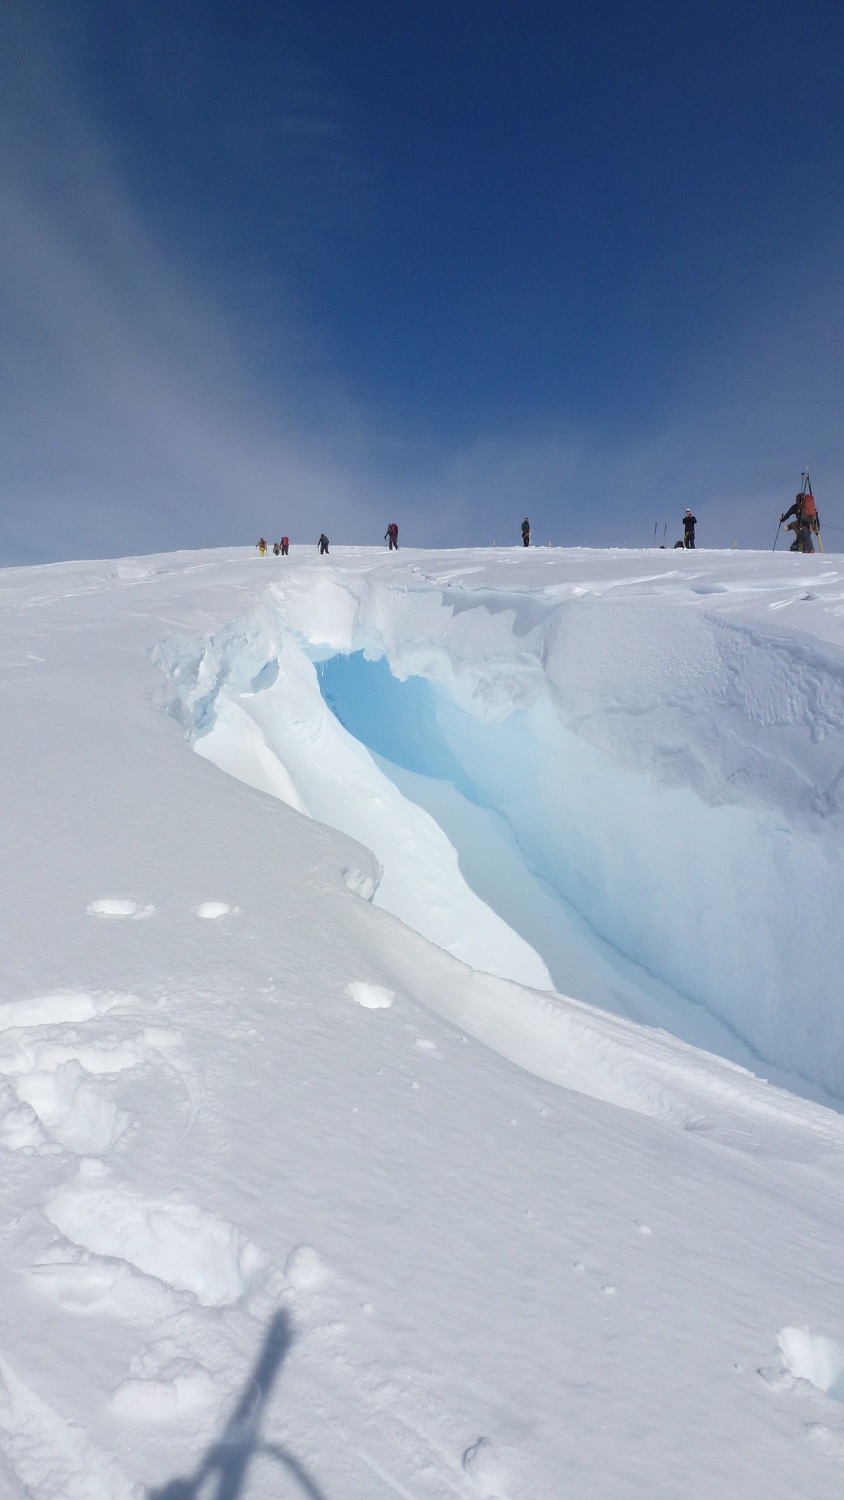 Roping Up To Travel Across Ice and Avoid Crevasses